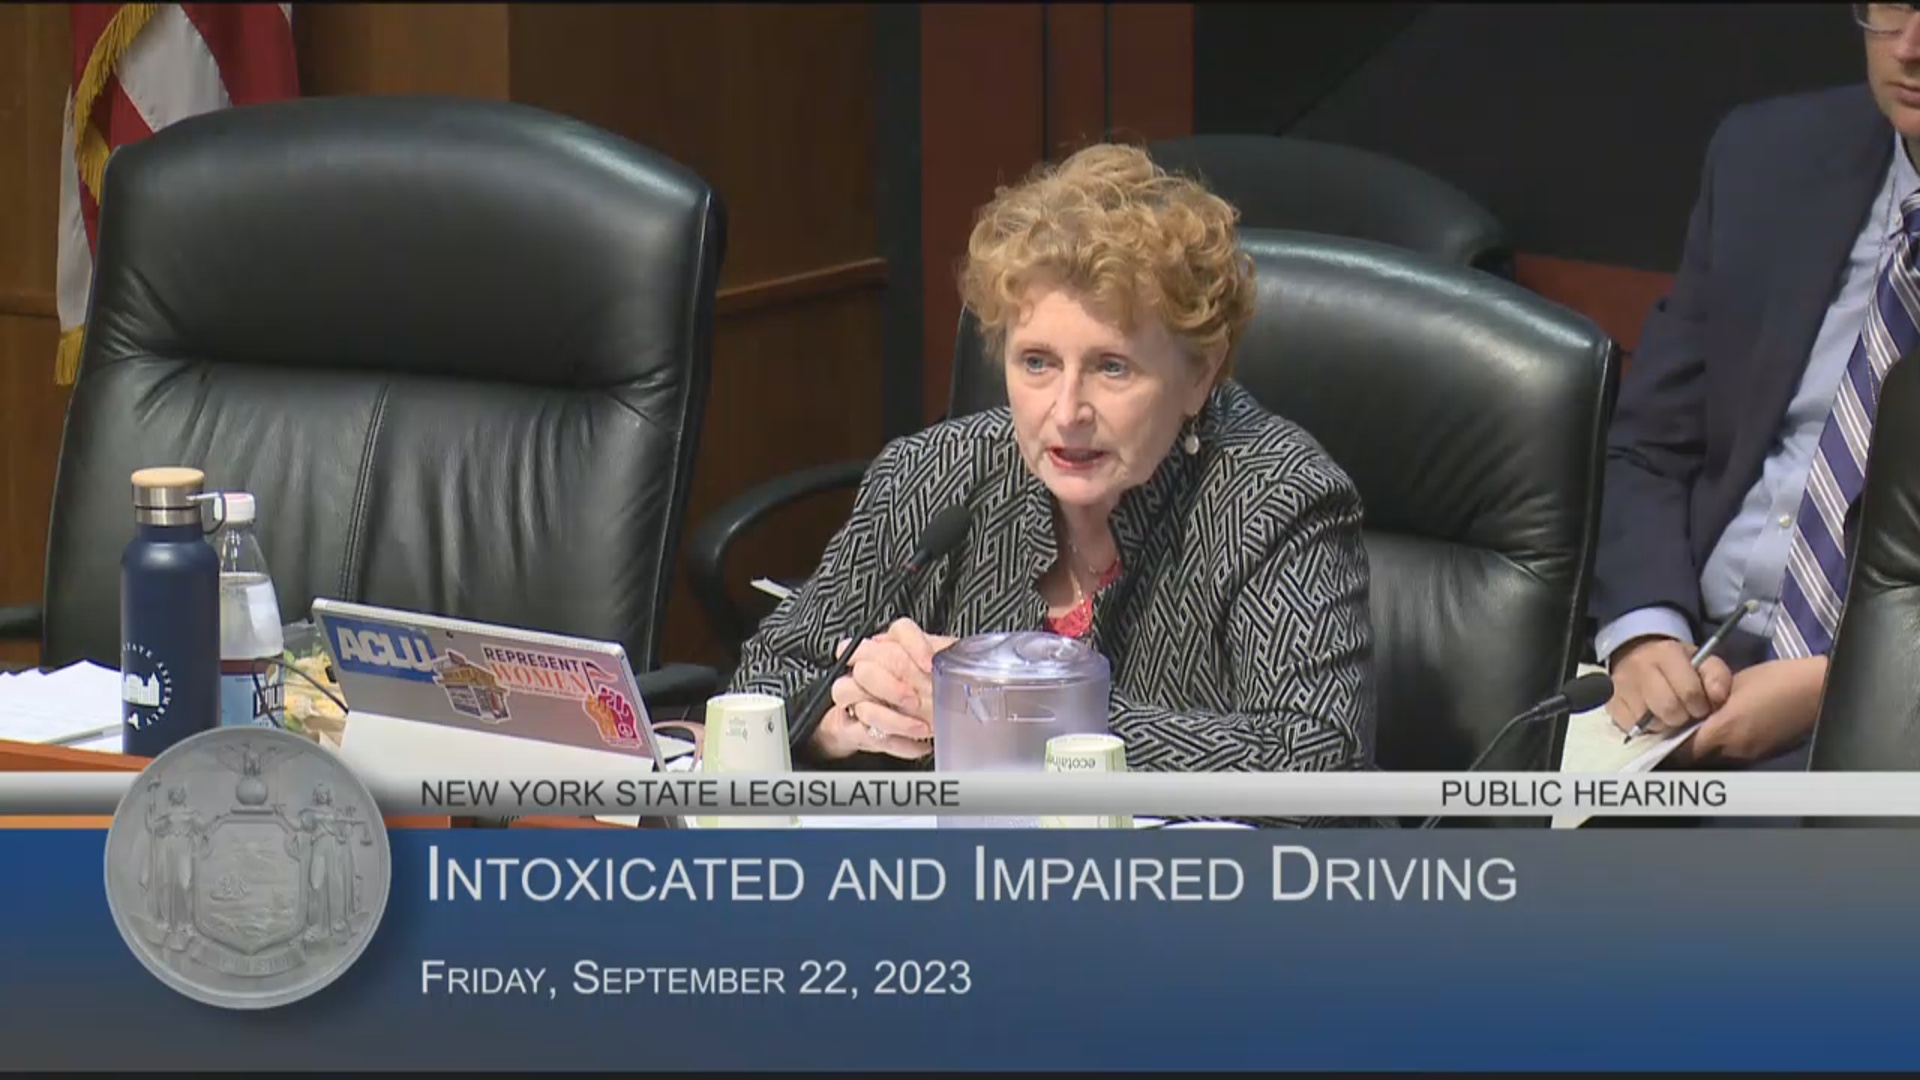 NTSB Representative Testifies on International Policies During Hearing on Intoxicated and Impaired Driving